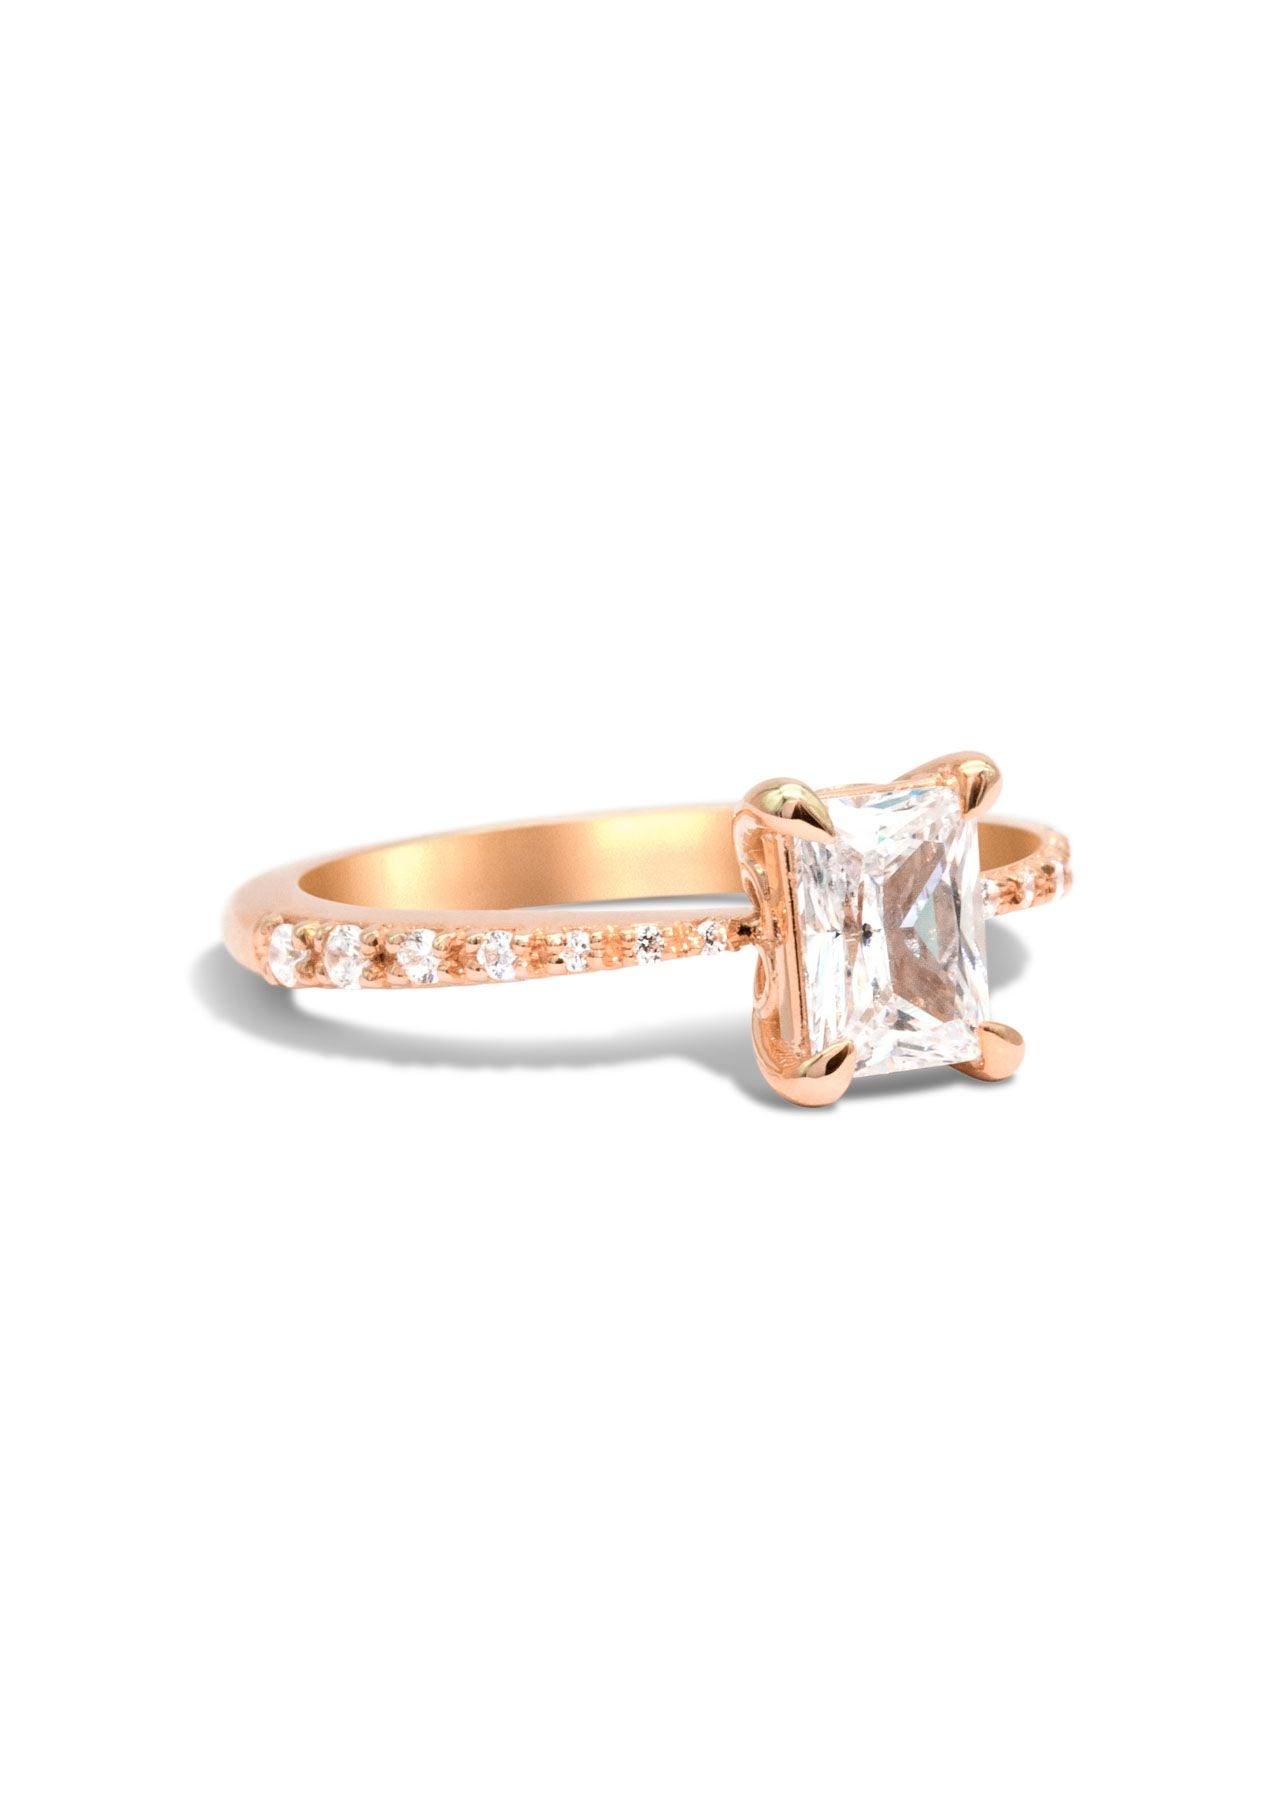 The Celine Rose Gold Cultured Diamond Ring - Molten Store